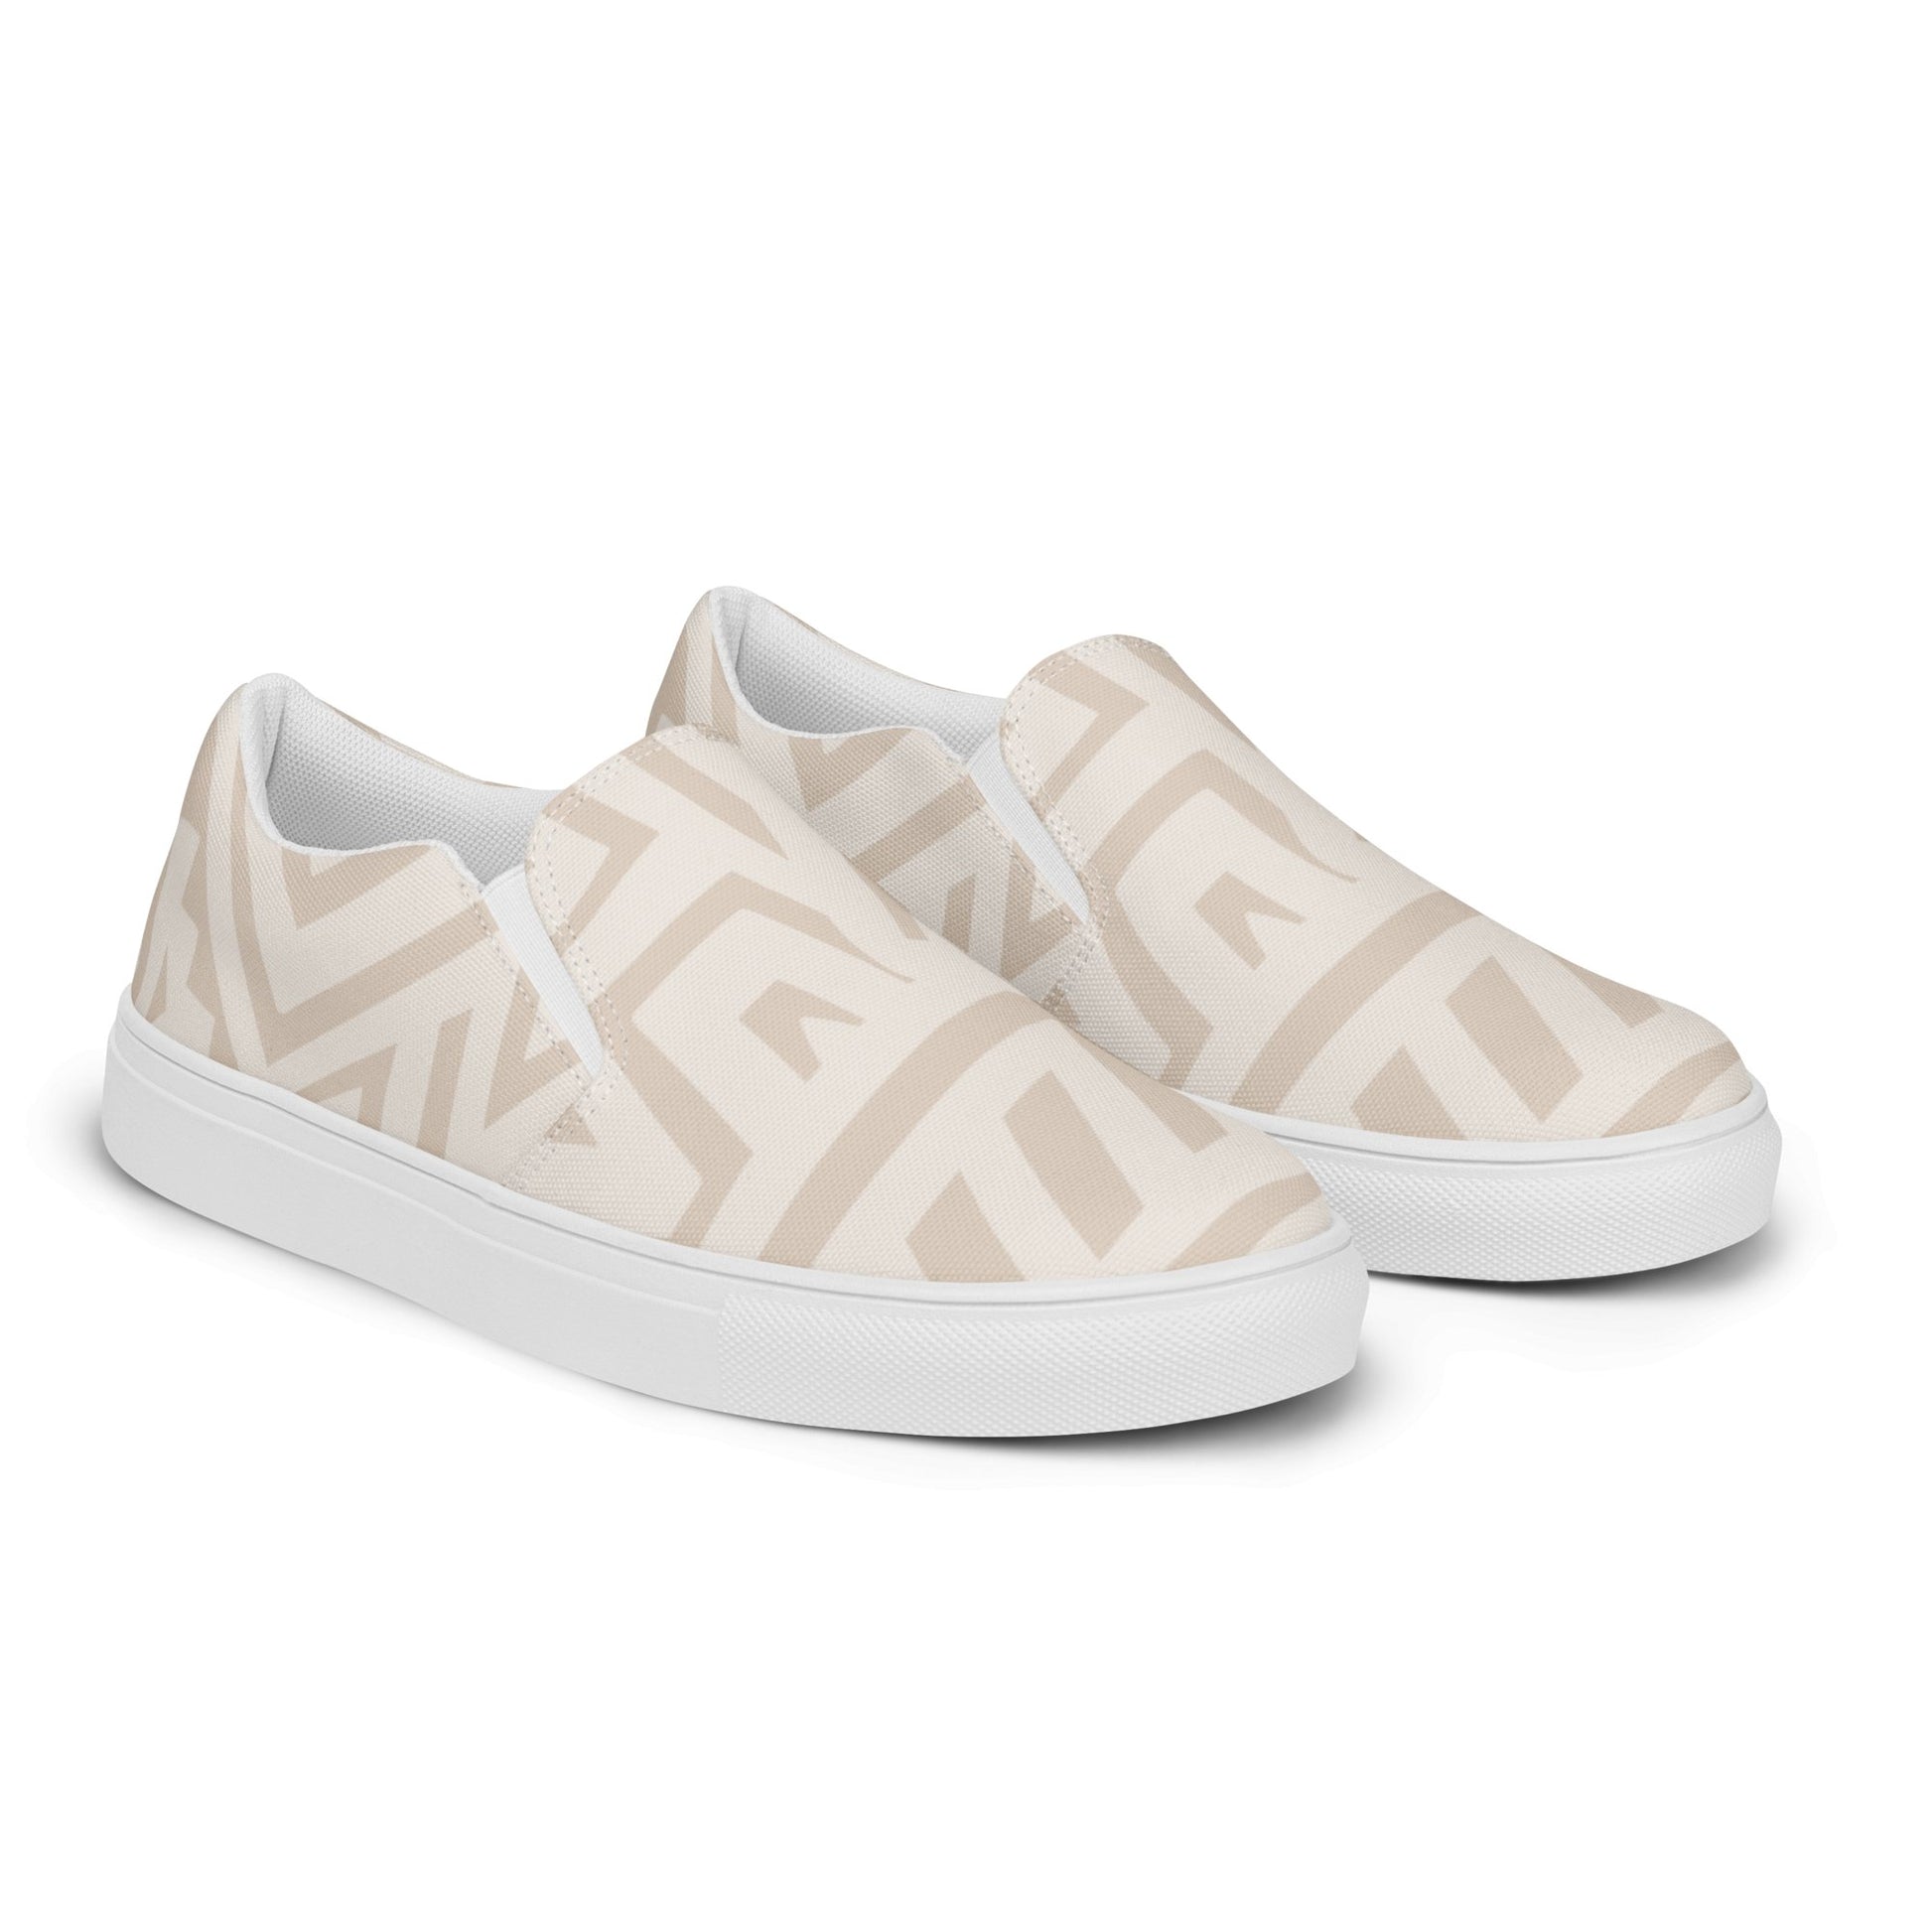 womens-slip-on-canvas-shoes-ethnic-style-pink-white